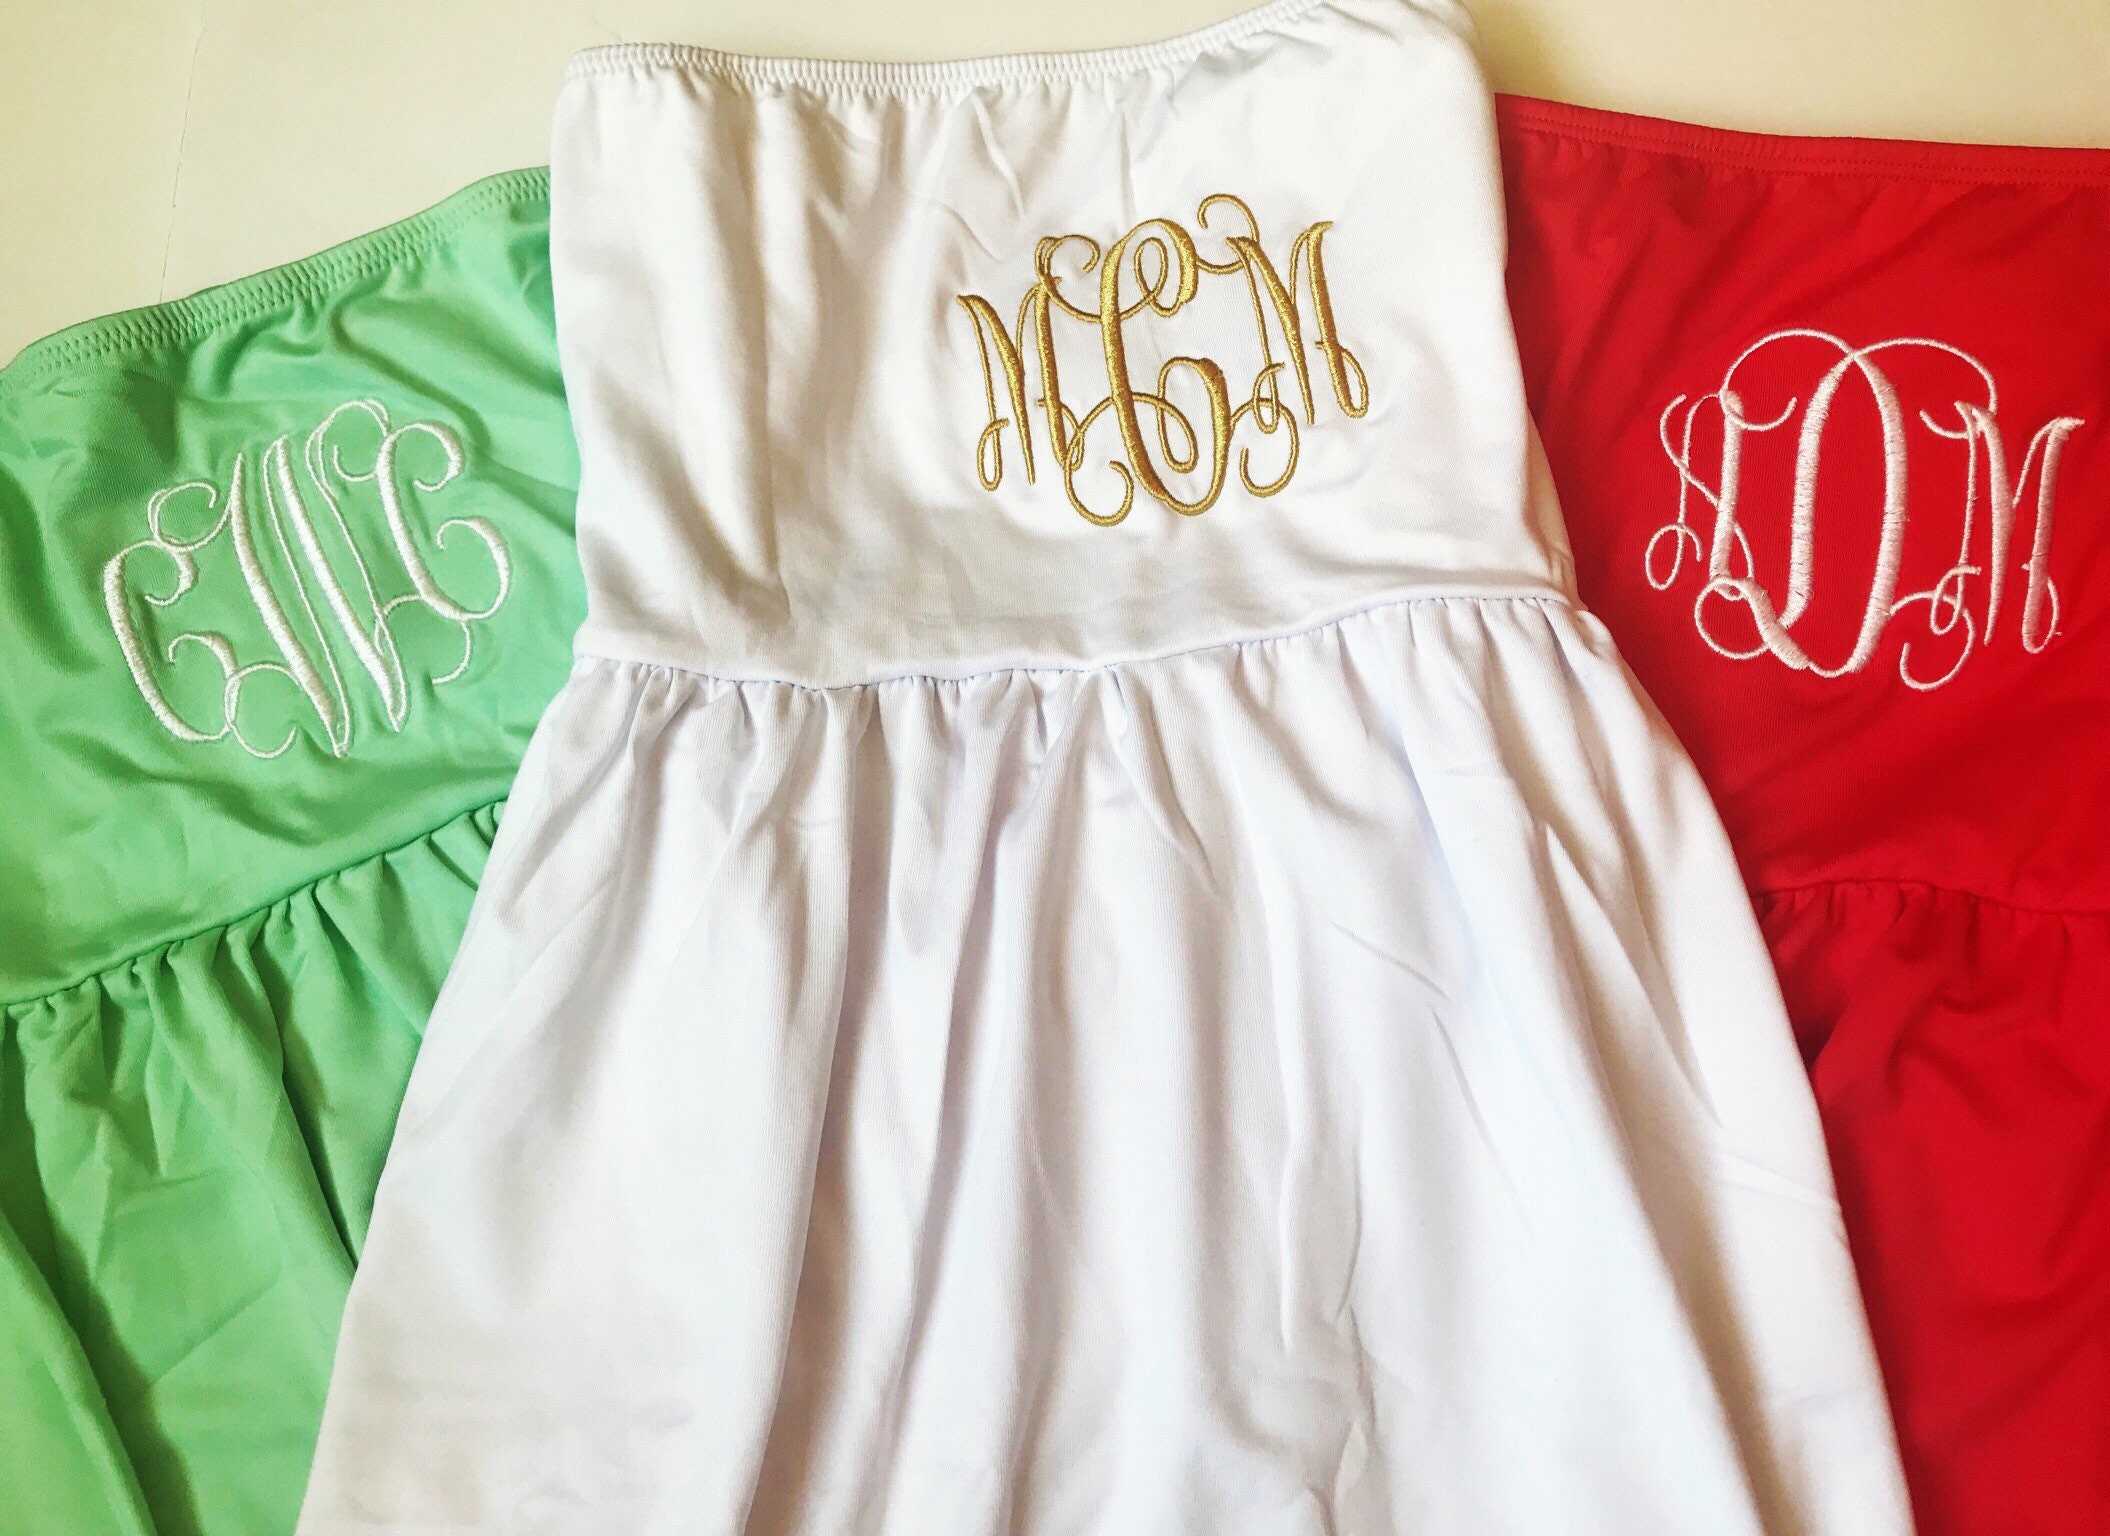 Monogrammed Beach Cover Up Dress / Monogrammed Getting Ready | Etsy